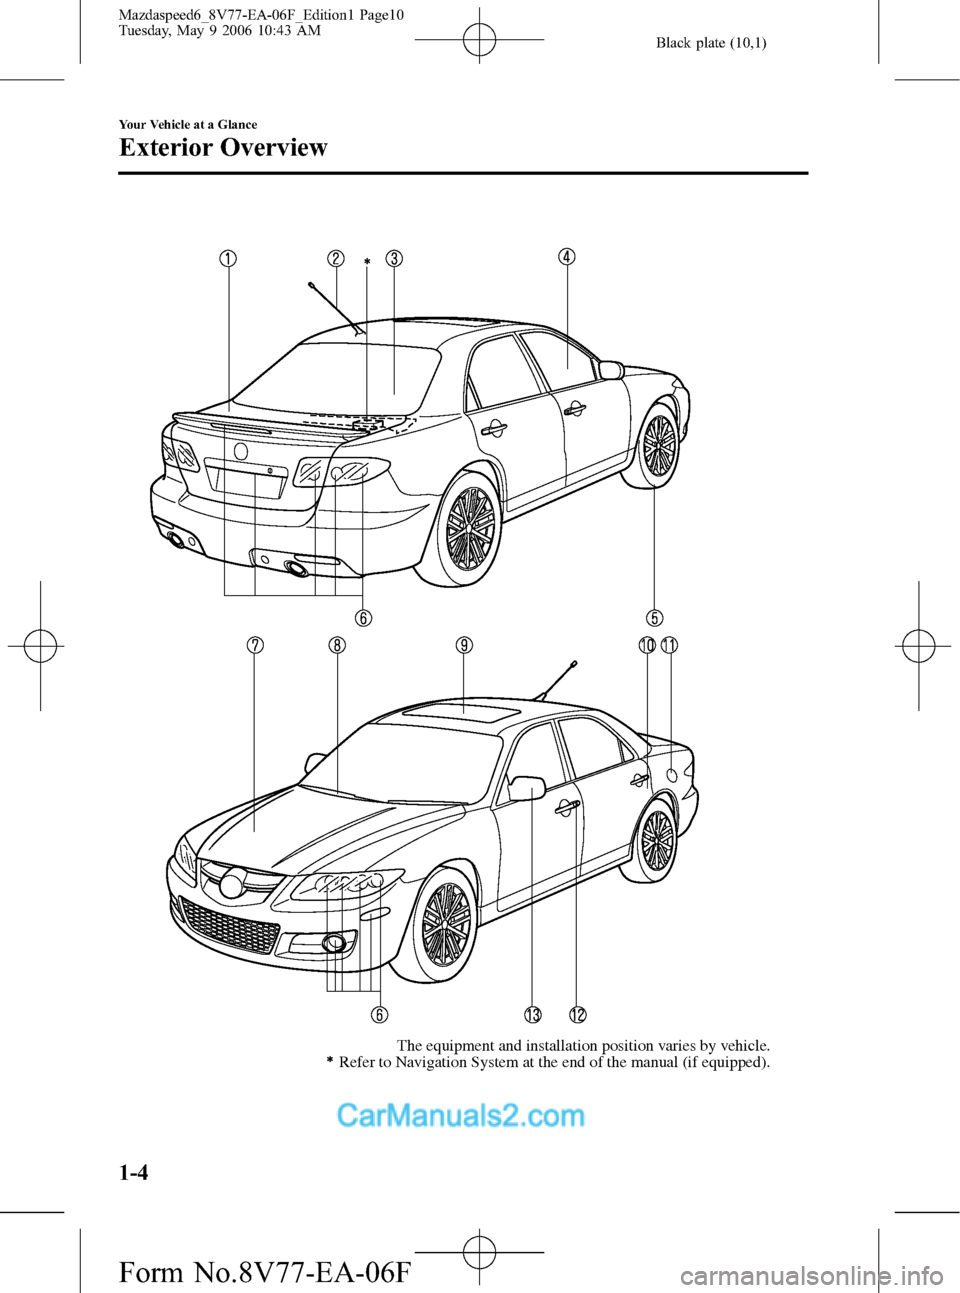 MAZDA MODEL MAZDASPEED 6 2007   (in English) User Guide Black plate (10,1)
The equipment and installation position varies by vehicle.
Refer to Navigation System at the end of the manual (if equipped).
1-4
Your Vehicle at a Glance
Exterior Overview
Mazdaspe